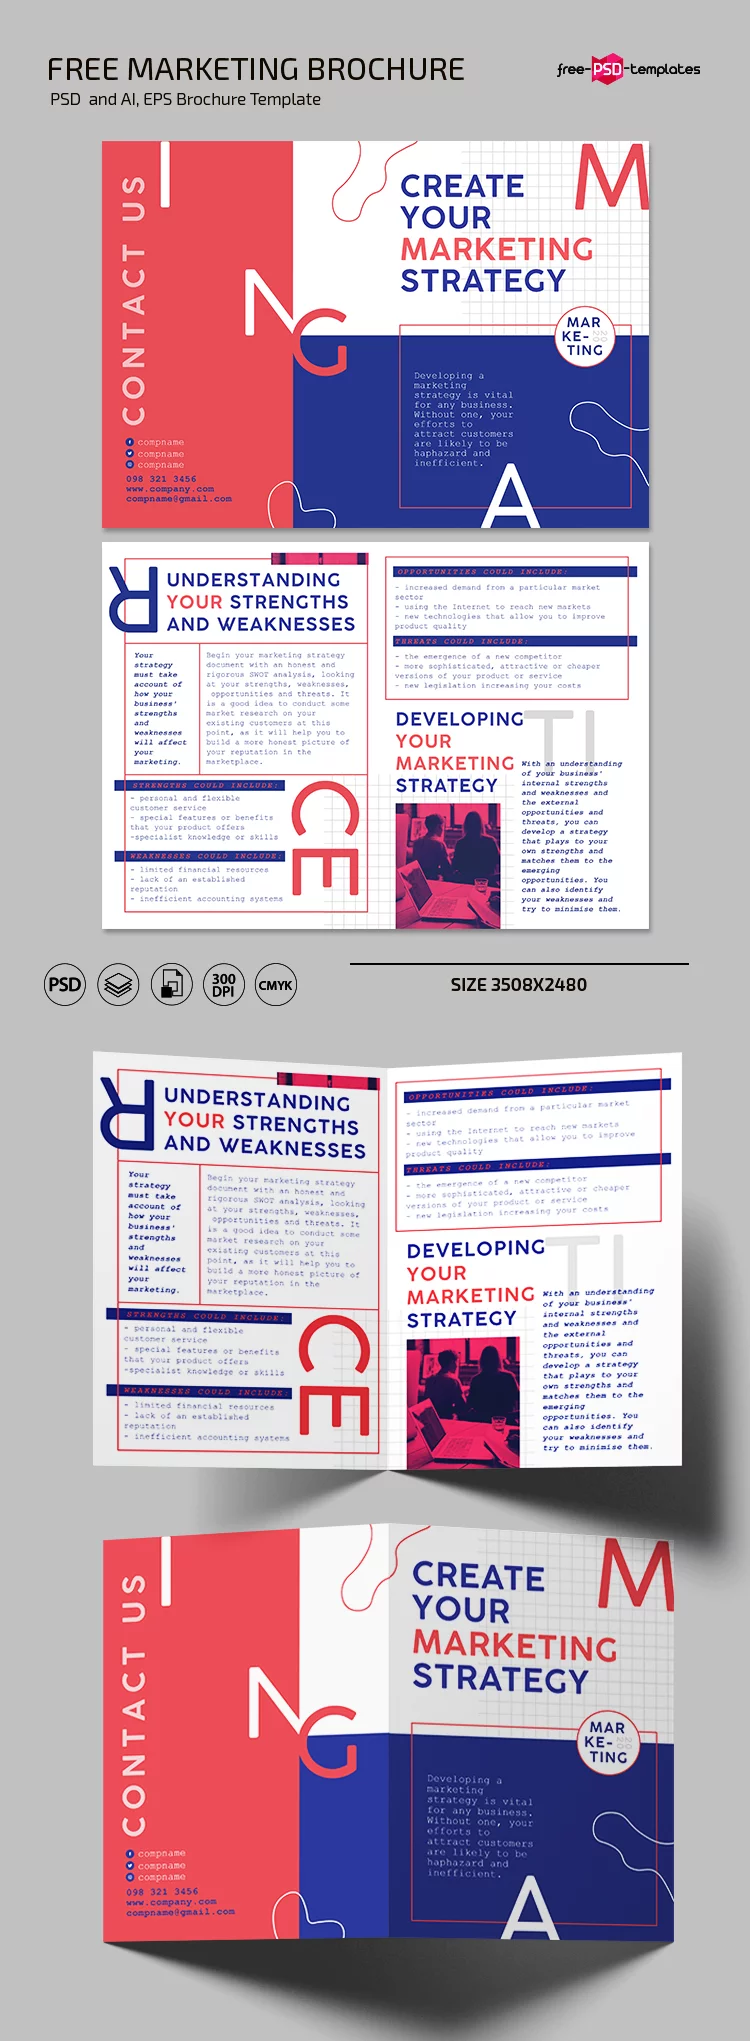 Free Marketing Brochure Template in PSD + Vector (.ai, .eps)